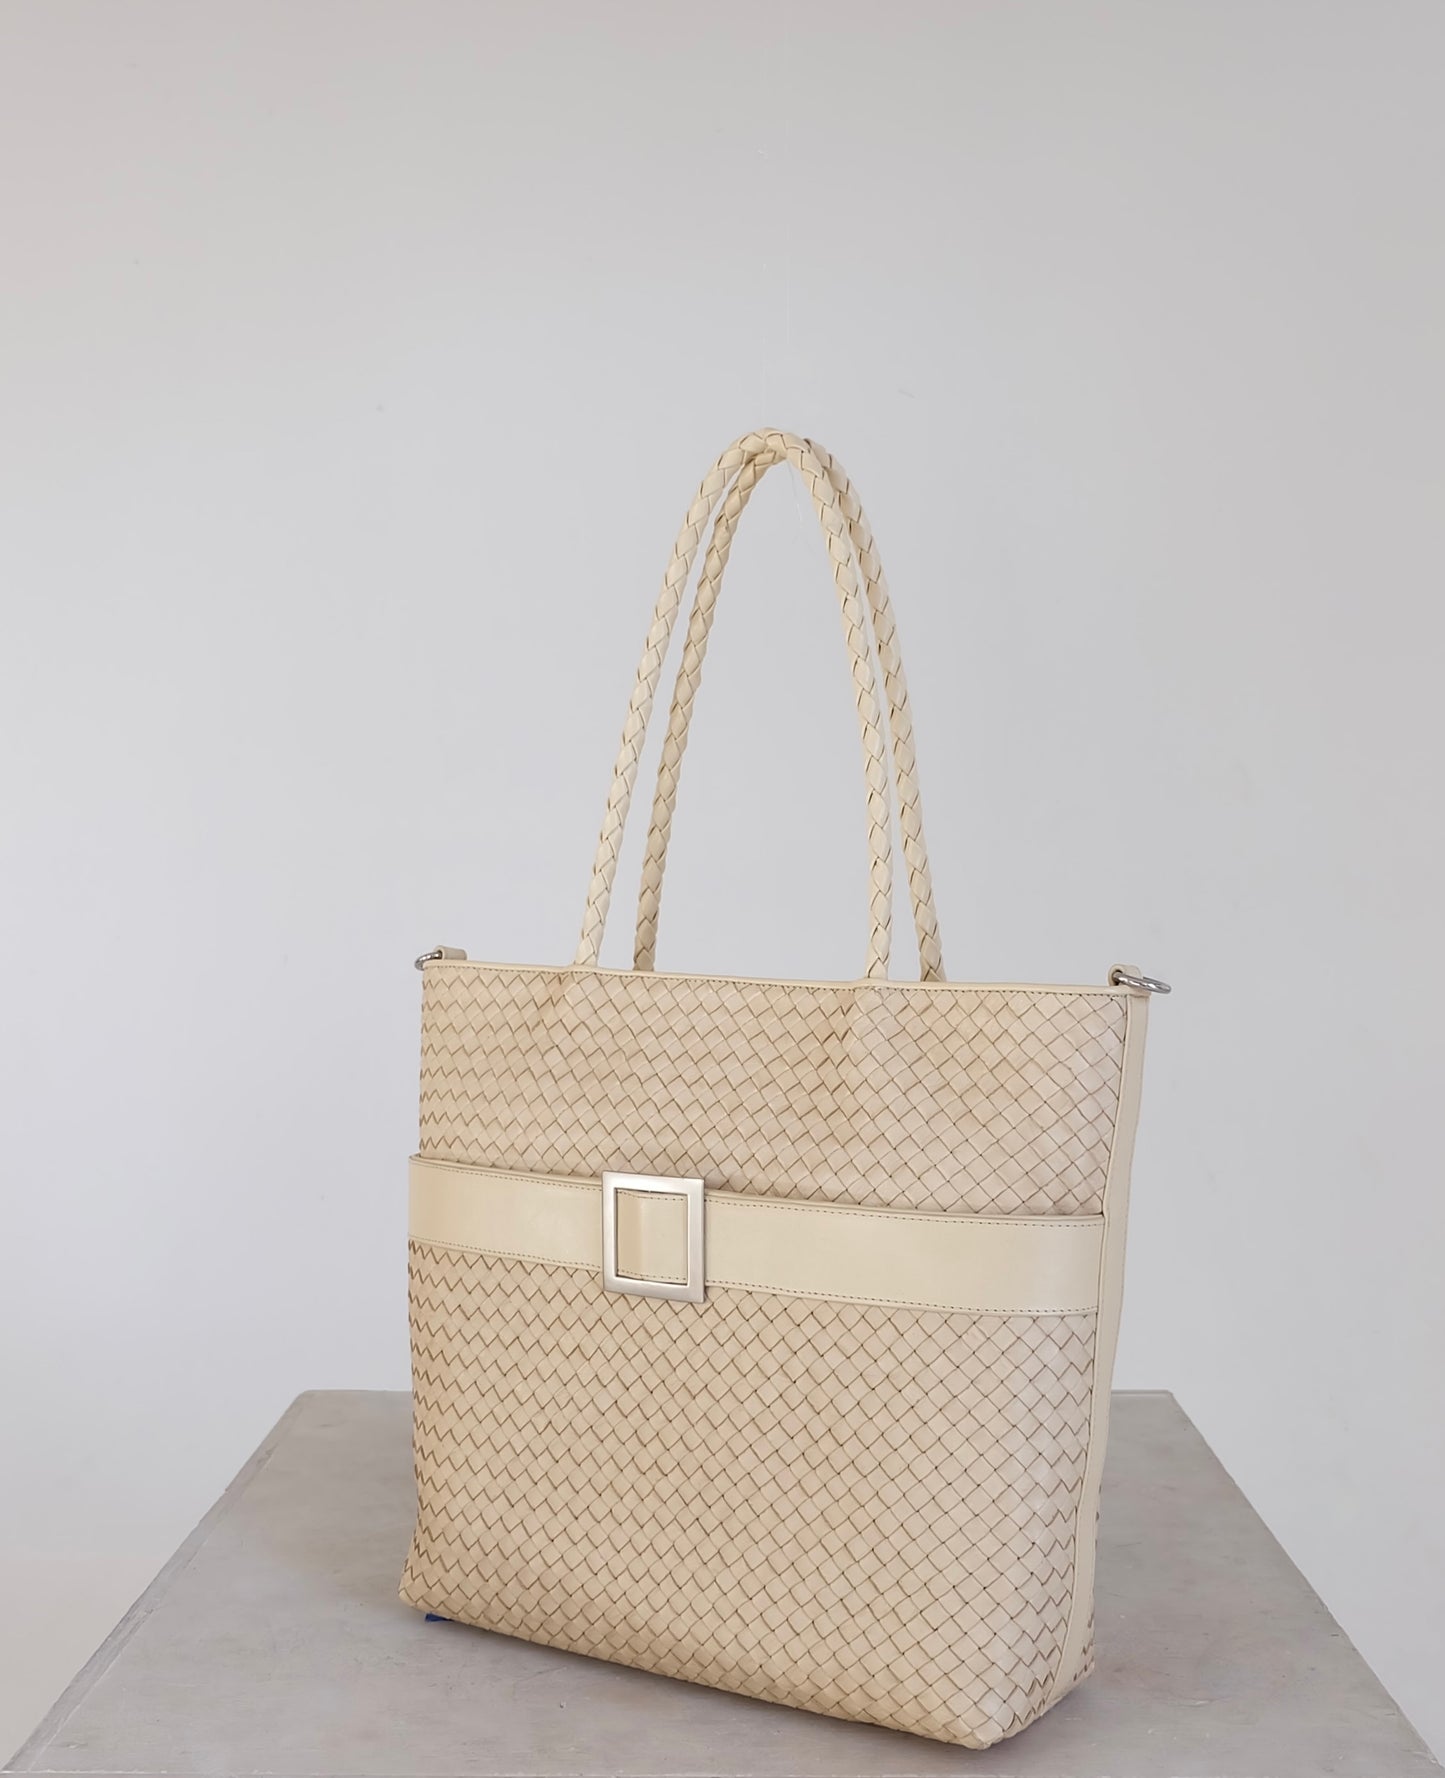 Sustainable Italian leather designer handbag, medium tote and crossbody in cream. Handbag with accent buckle that is a functional work of art.